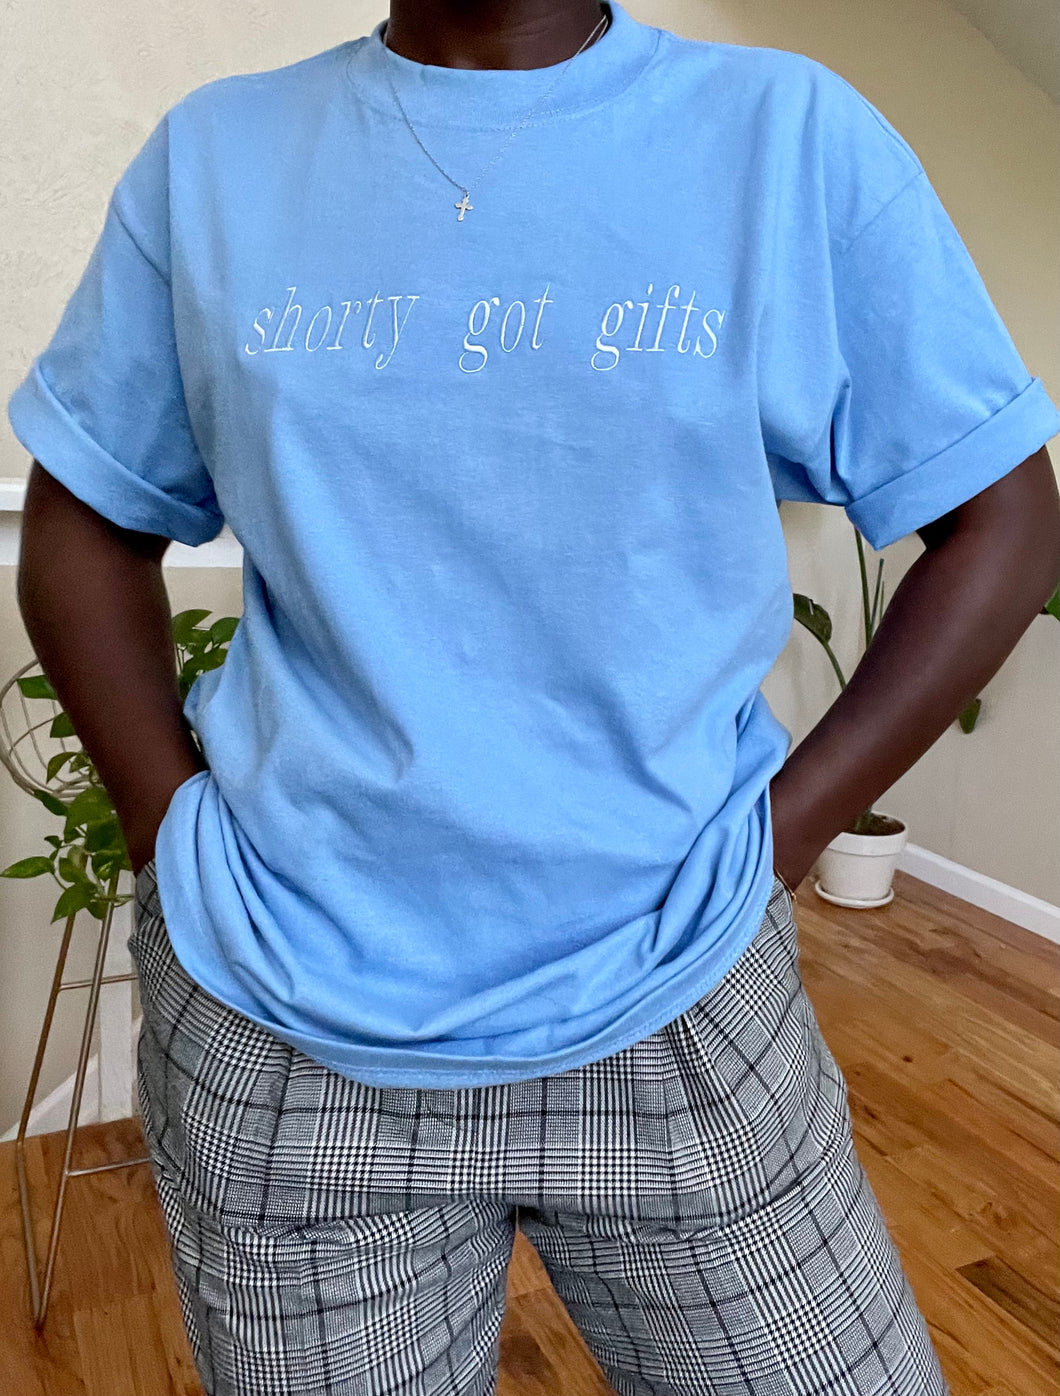 sky blue shorty got gifts tee